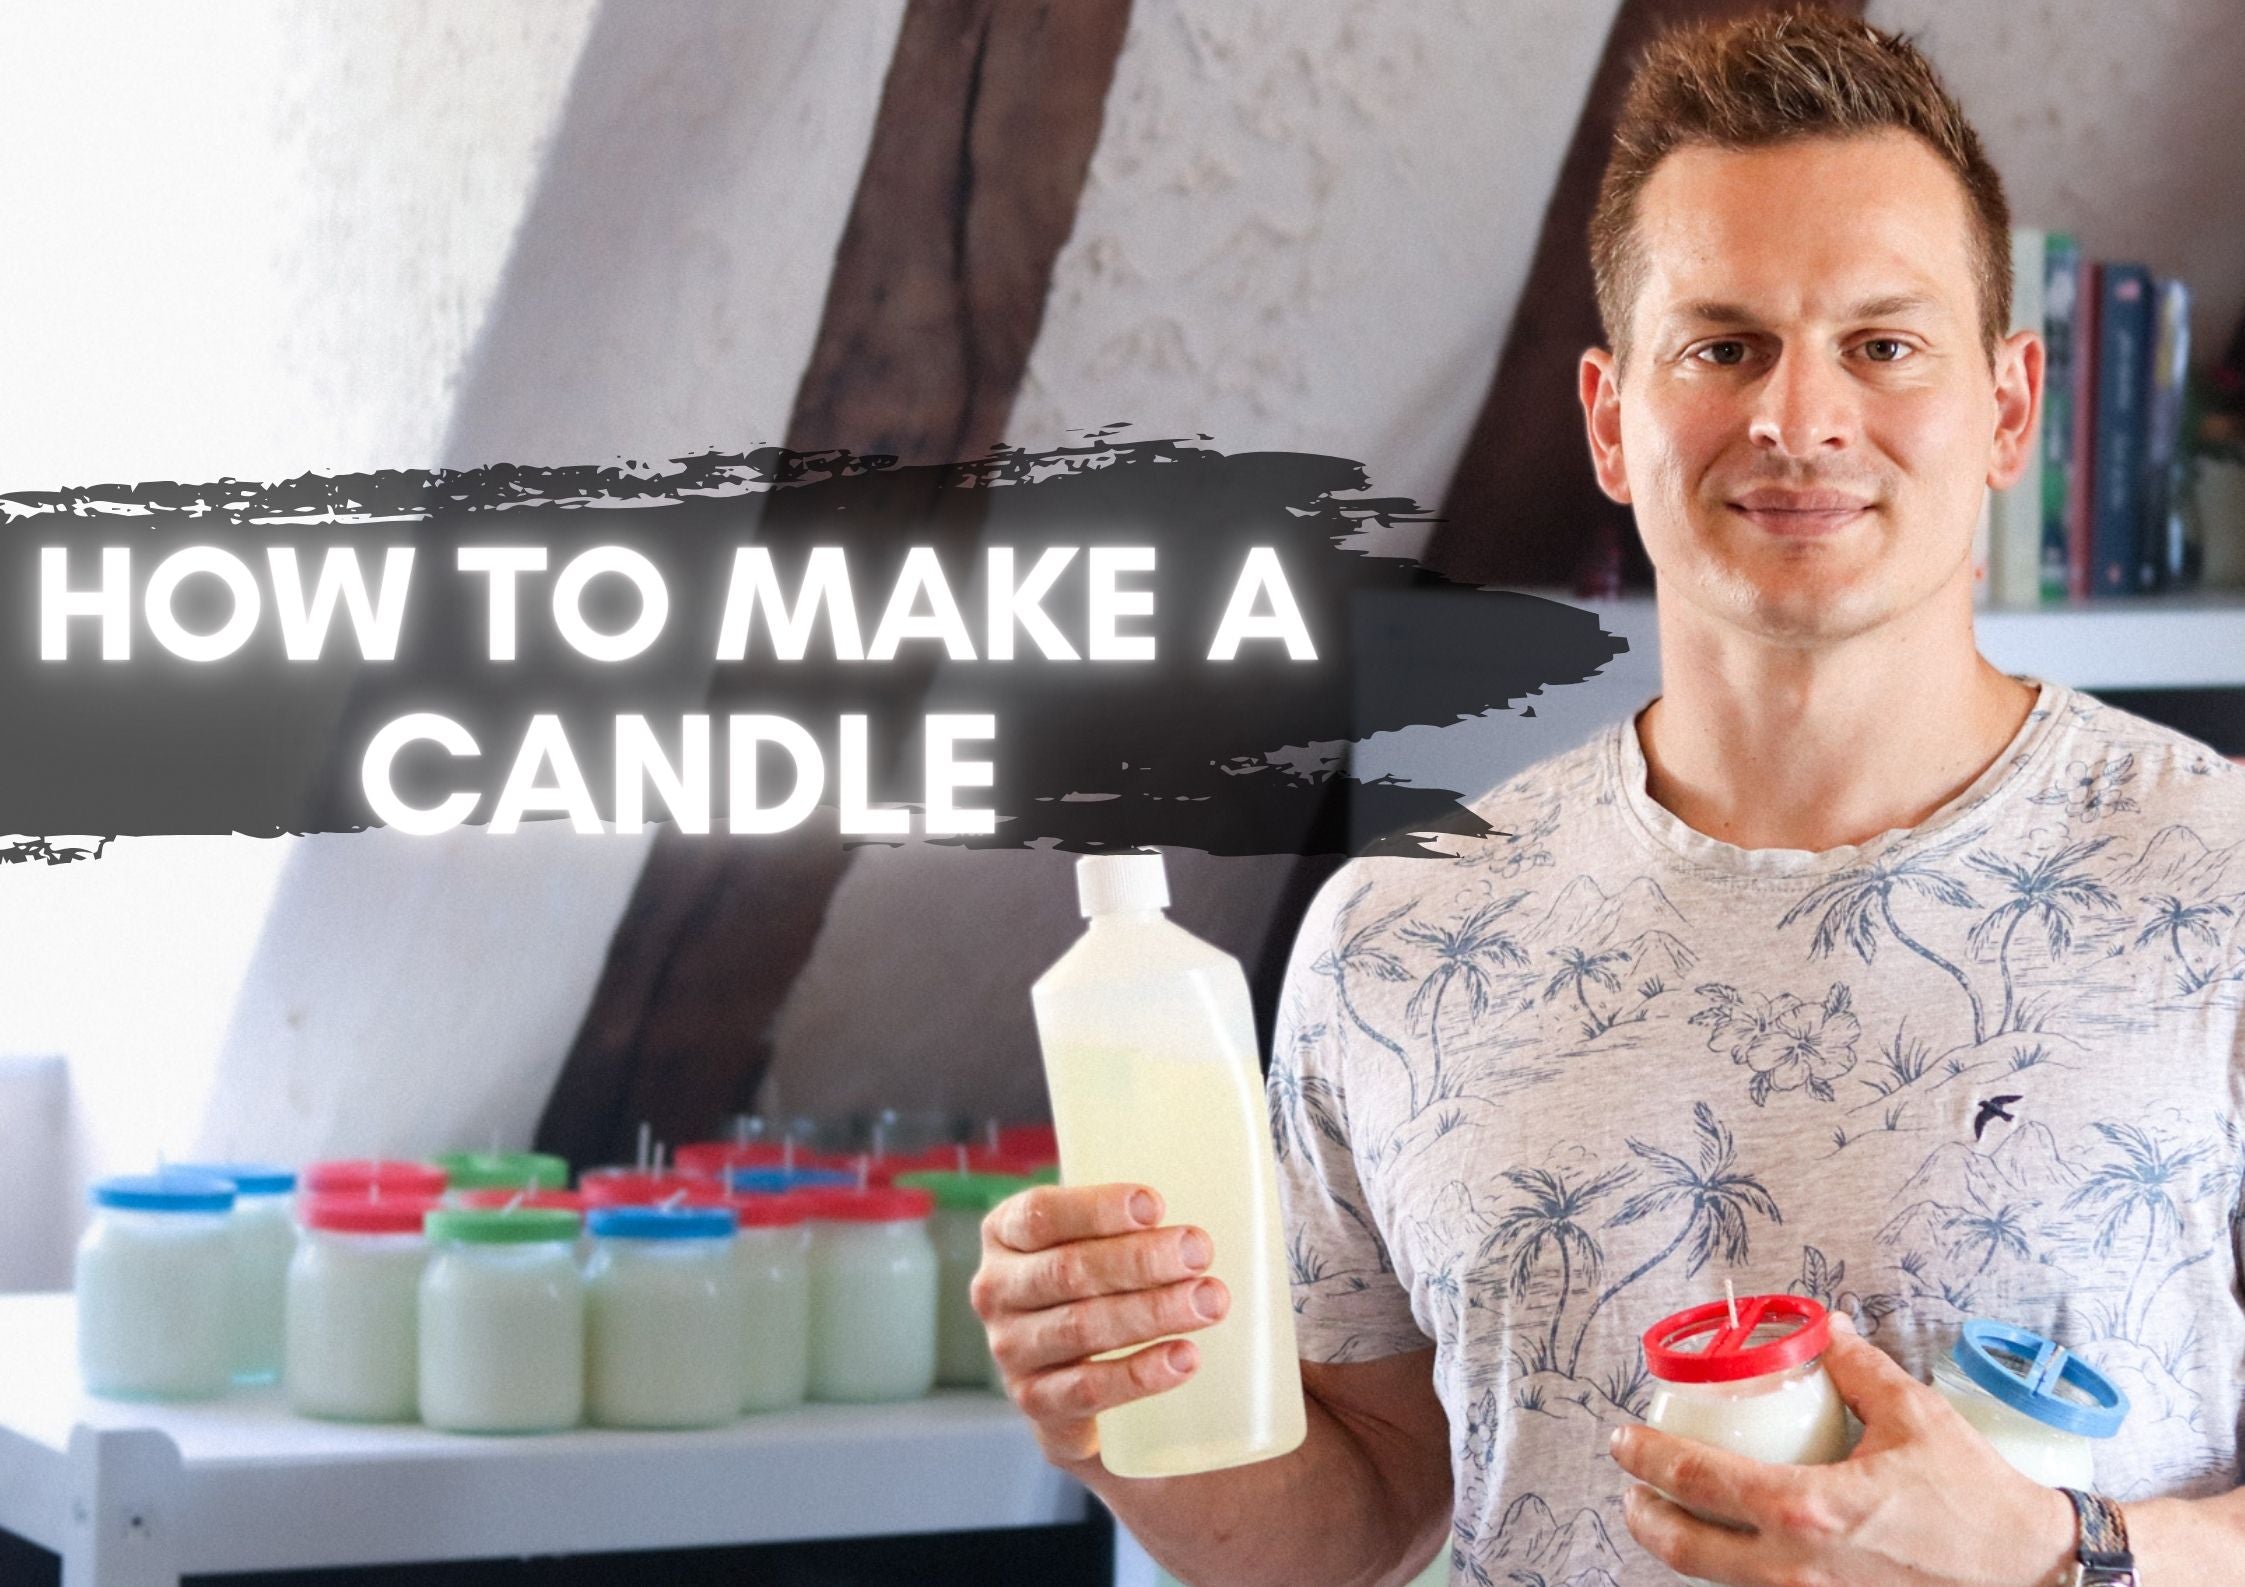 How to make a soy wax candle at home?